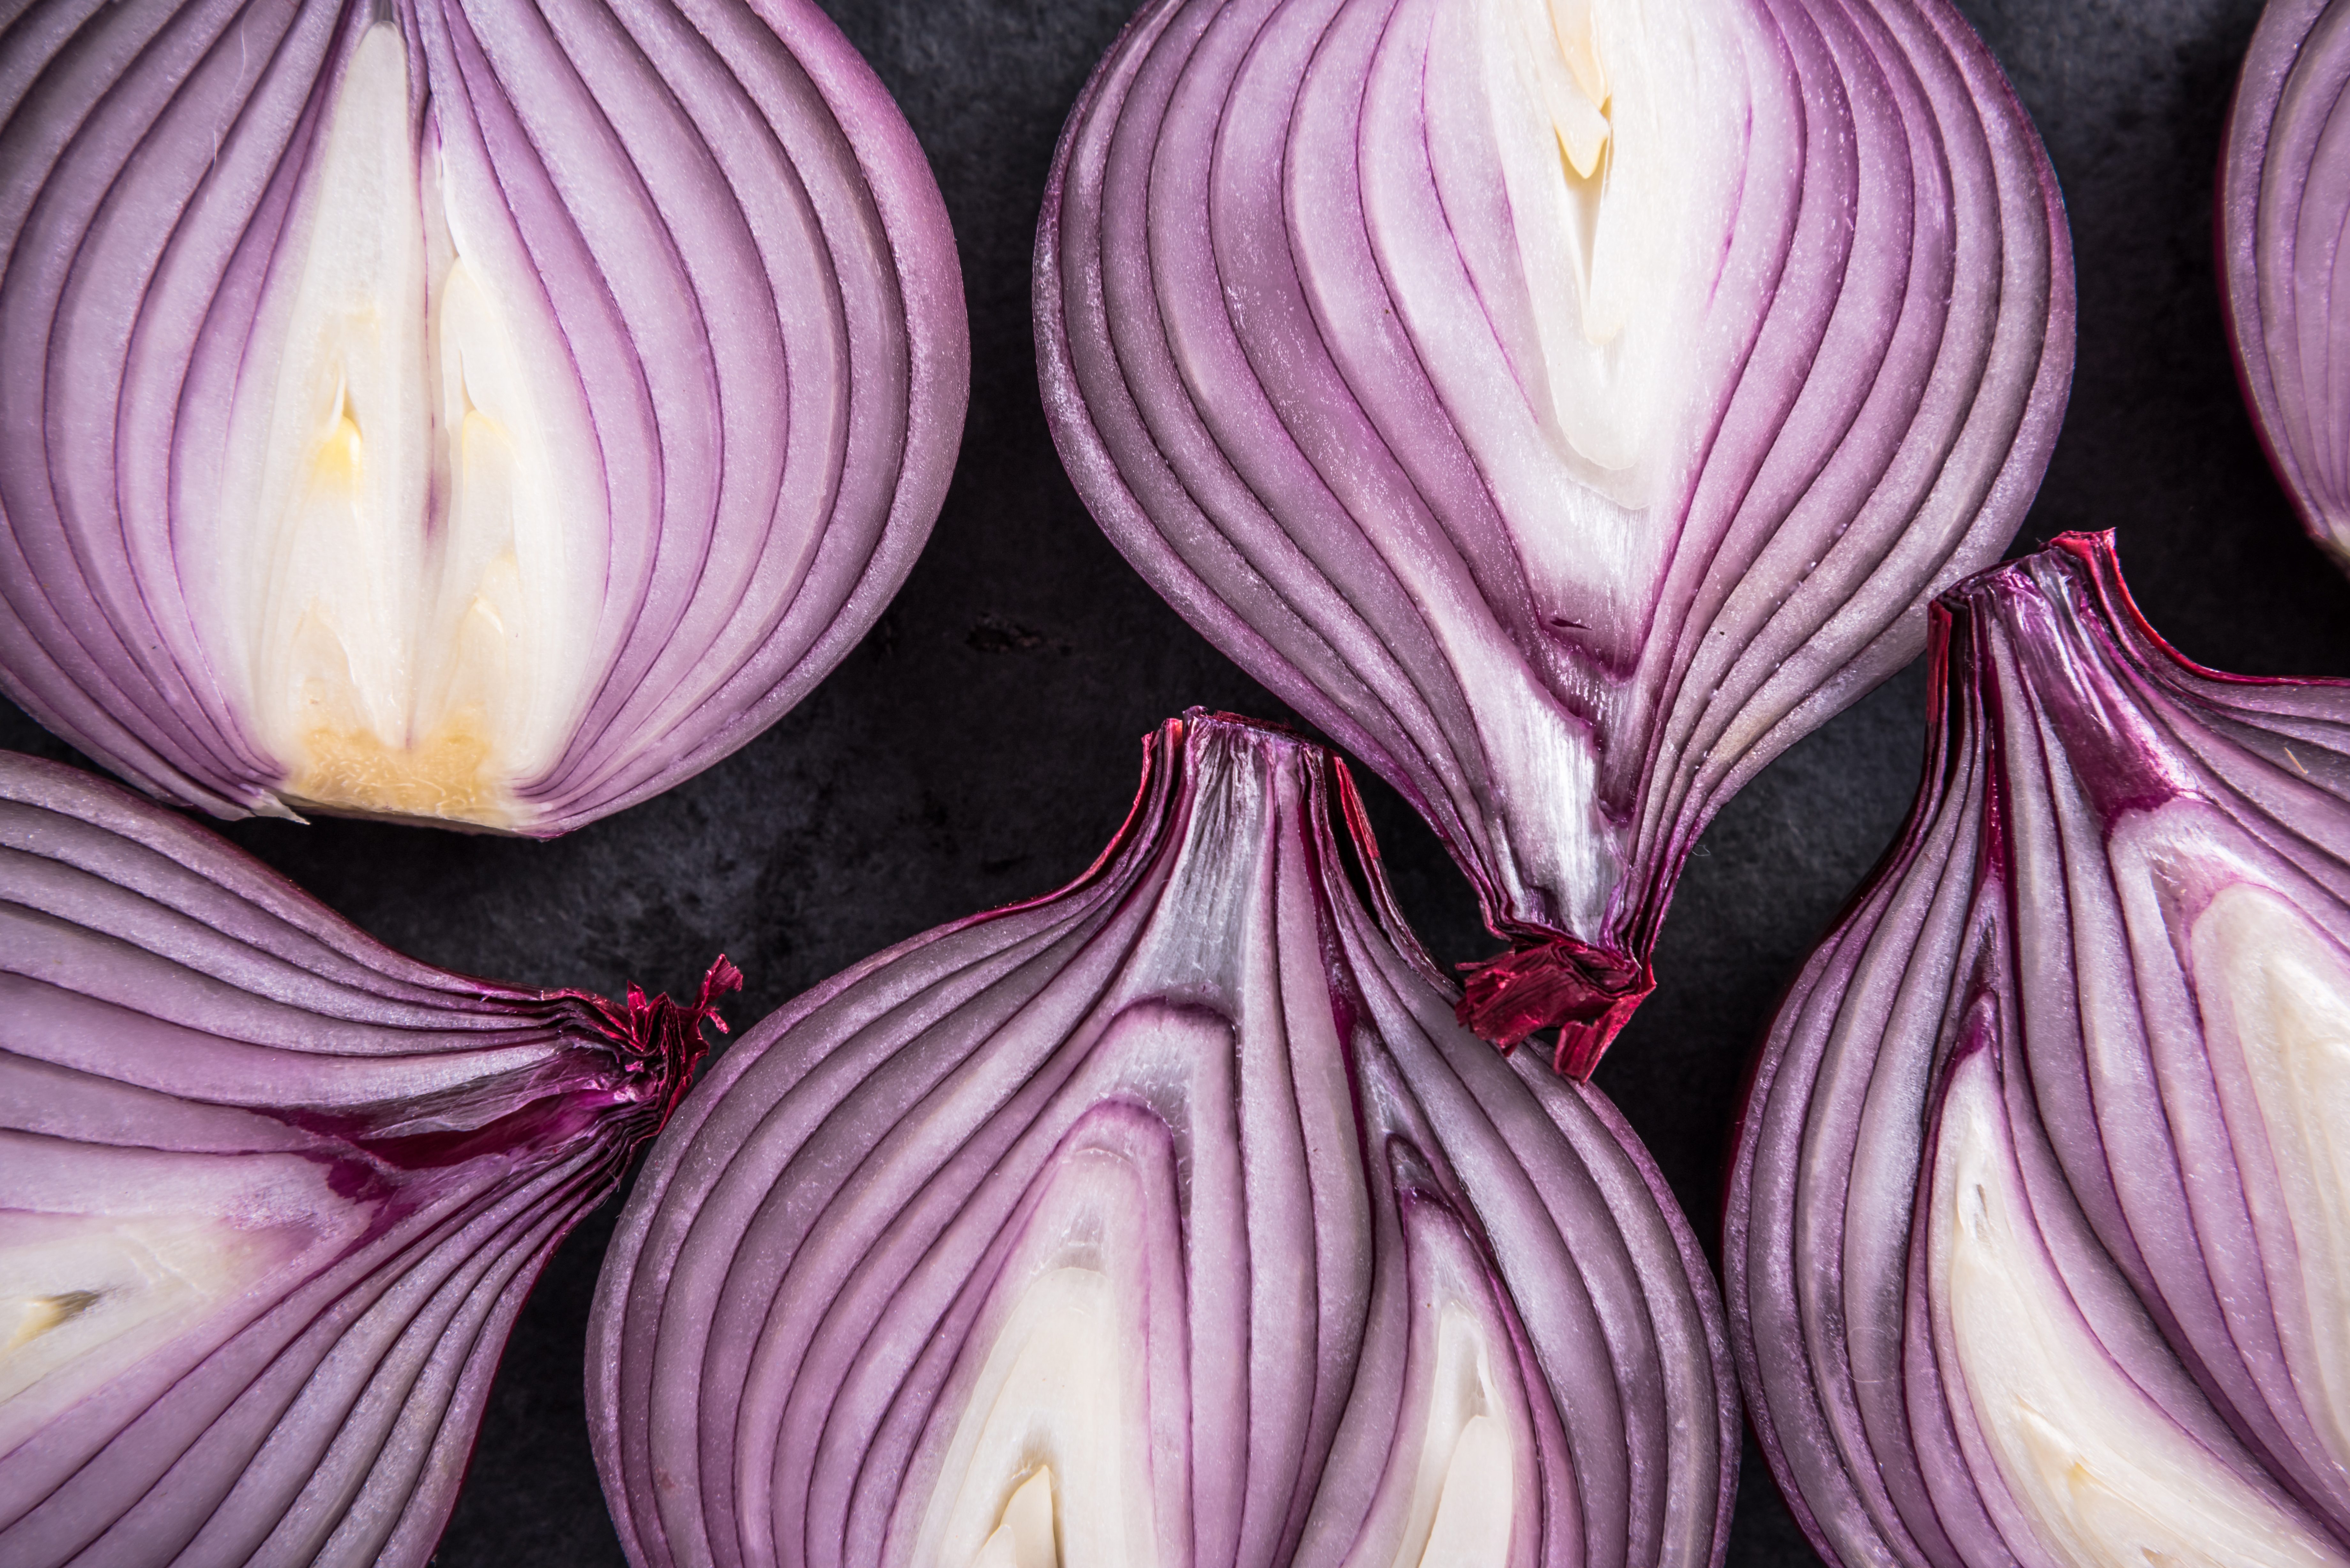 Red onion halves, texture details and pattern, flat lay from above